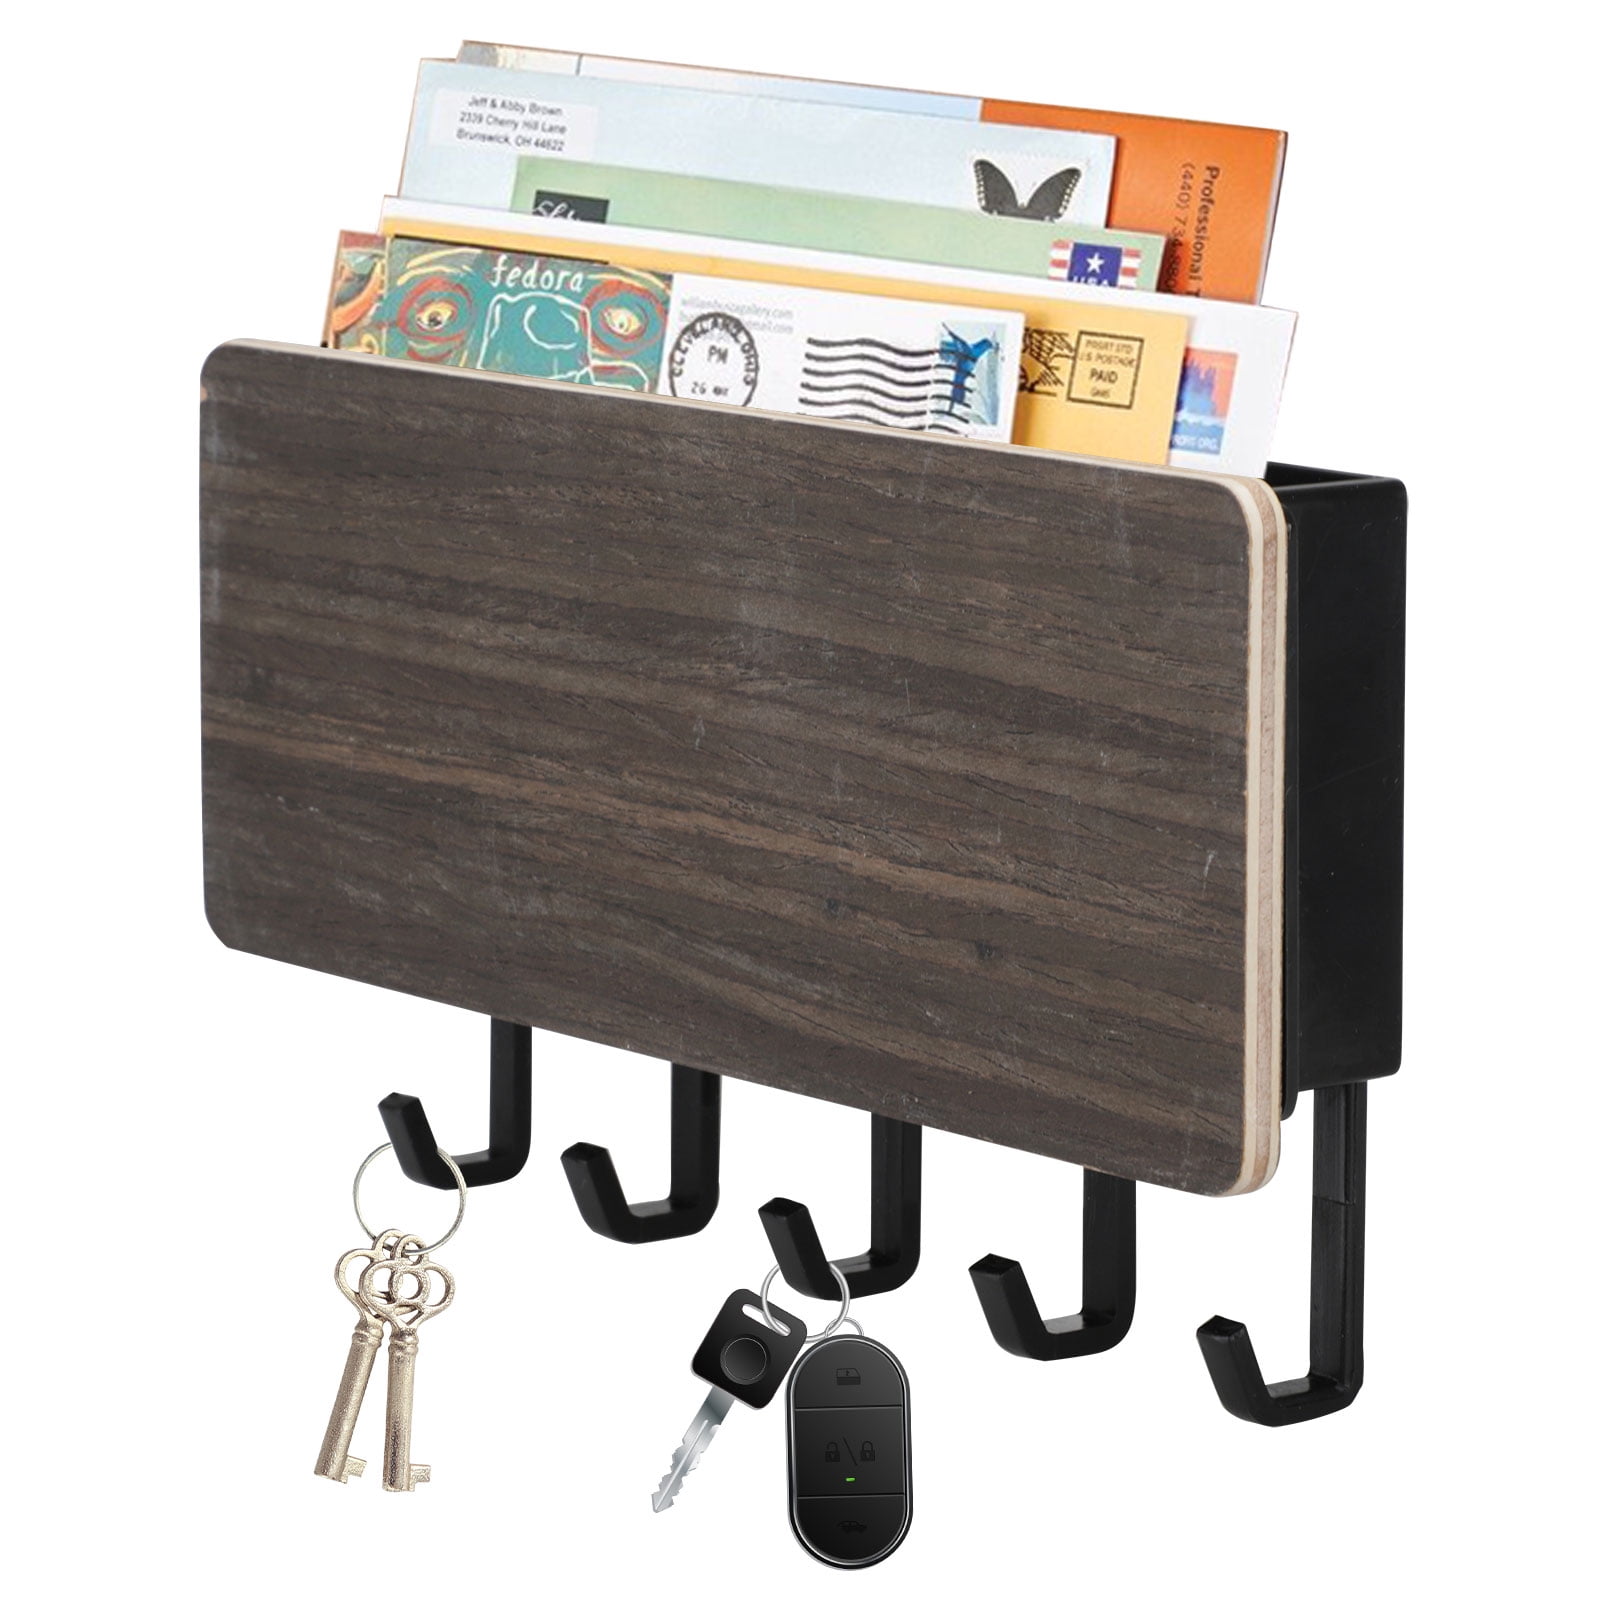 Mail and Key Holder Entryway Wall Mounted Key Organizer Rack Letter Sorter Black 